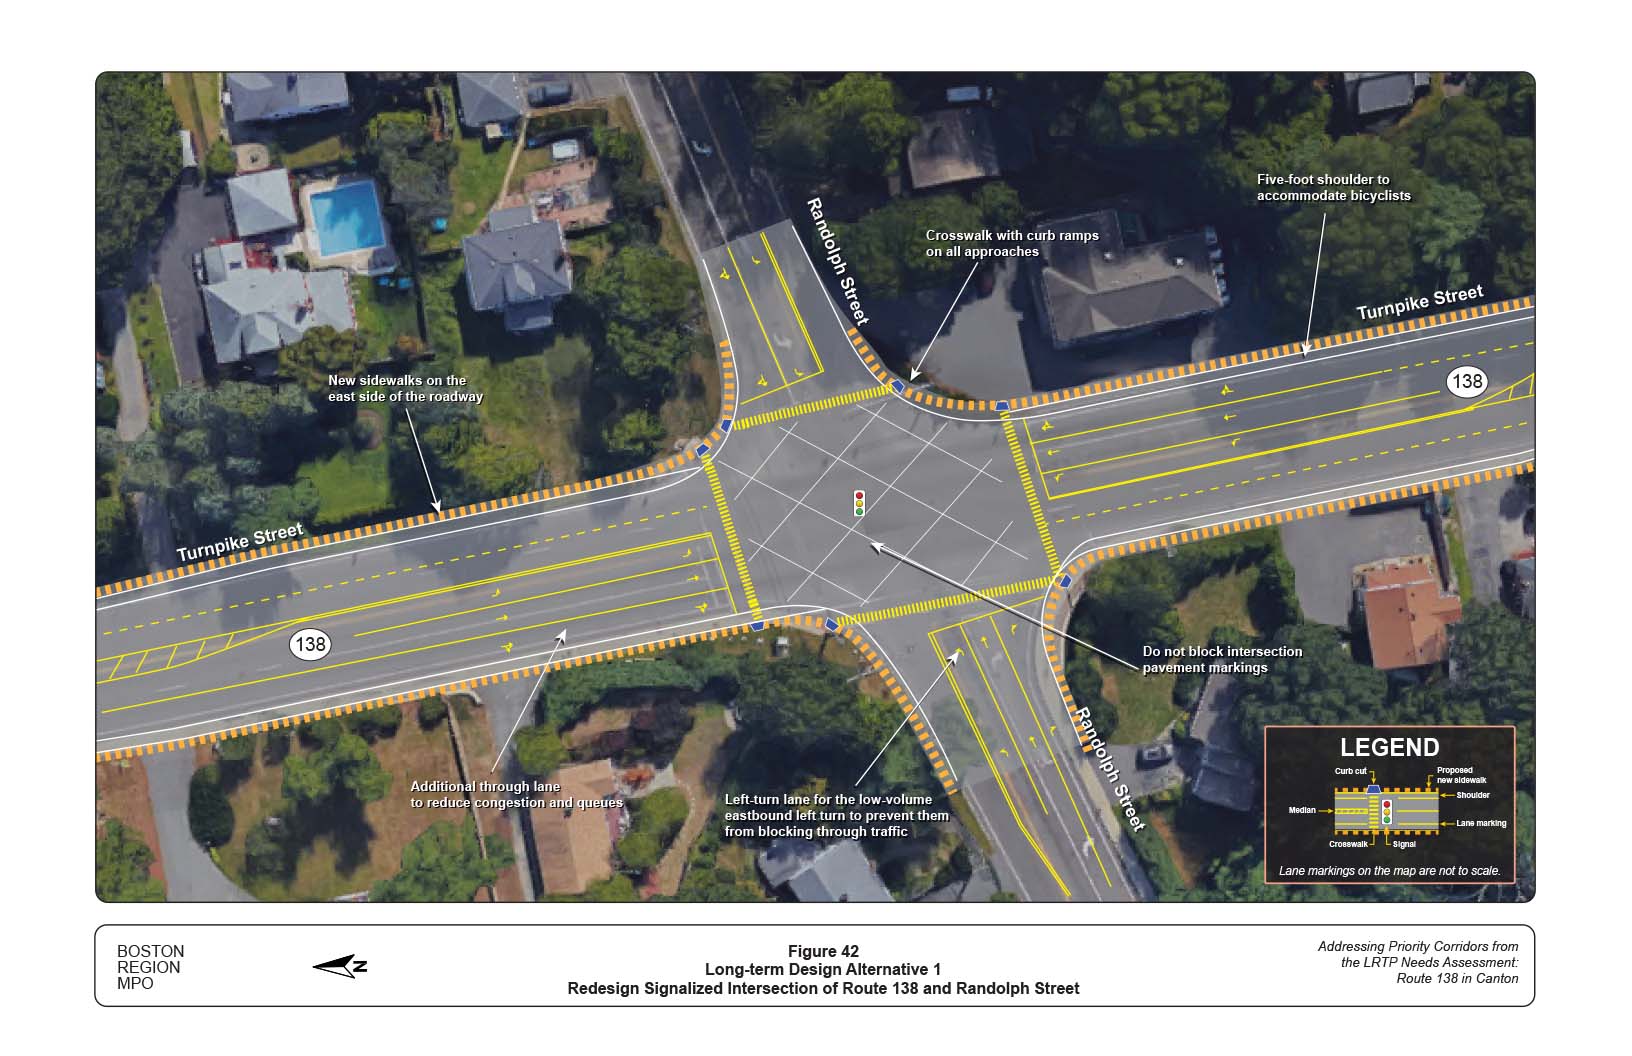 Figure 42 is map of the intersection of Route 138 and Randolph Street with overlays showing an alternative for a redesign of the intersection.